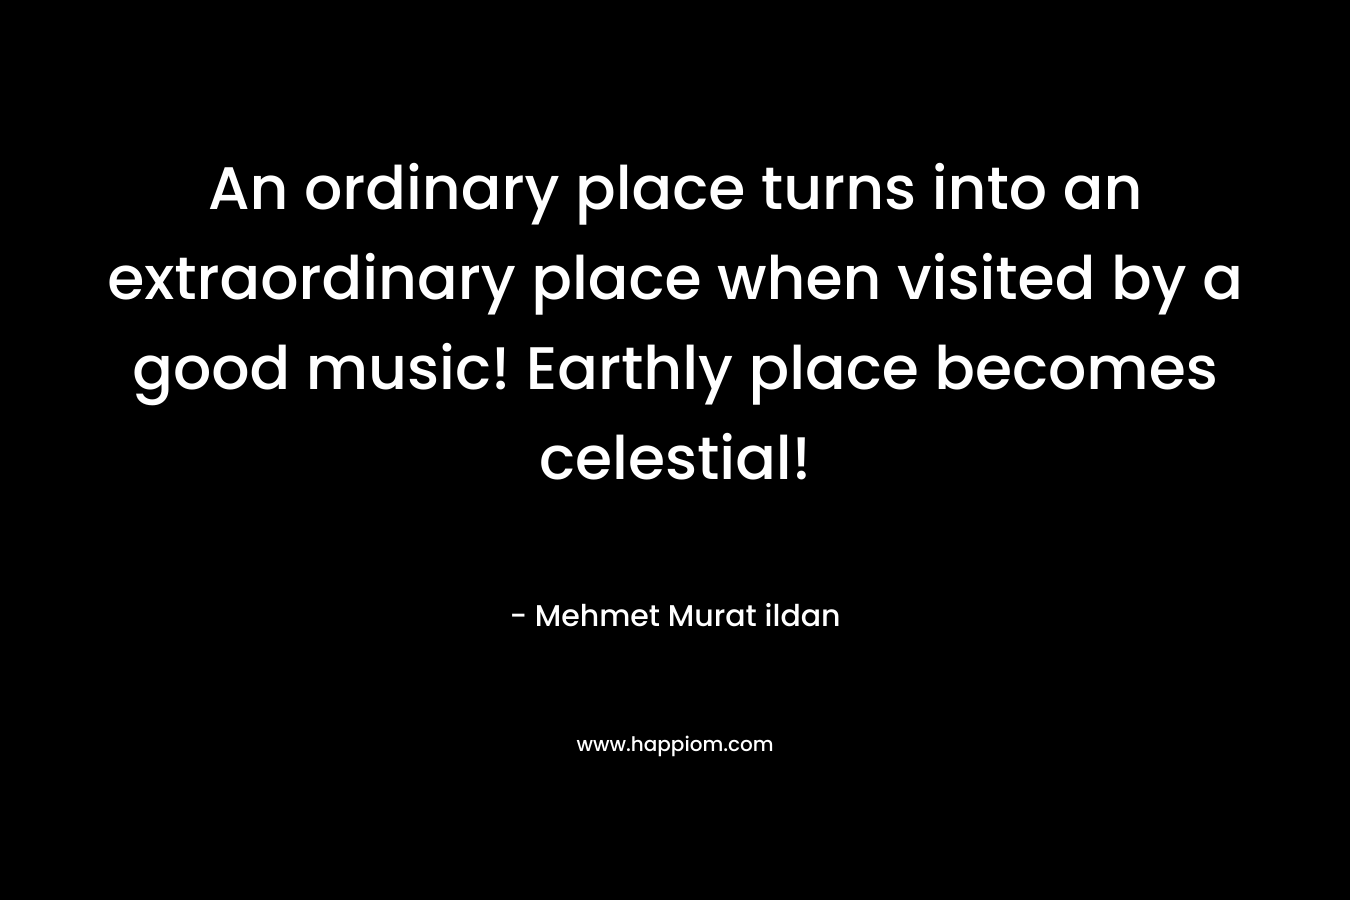 An ordinary place turns into an extraordinary place when visited by a good music! Earthly place becomes celestial!